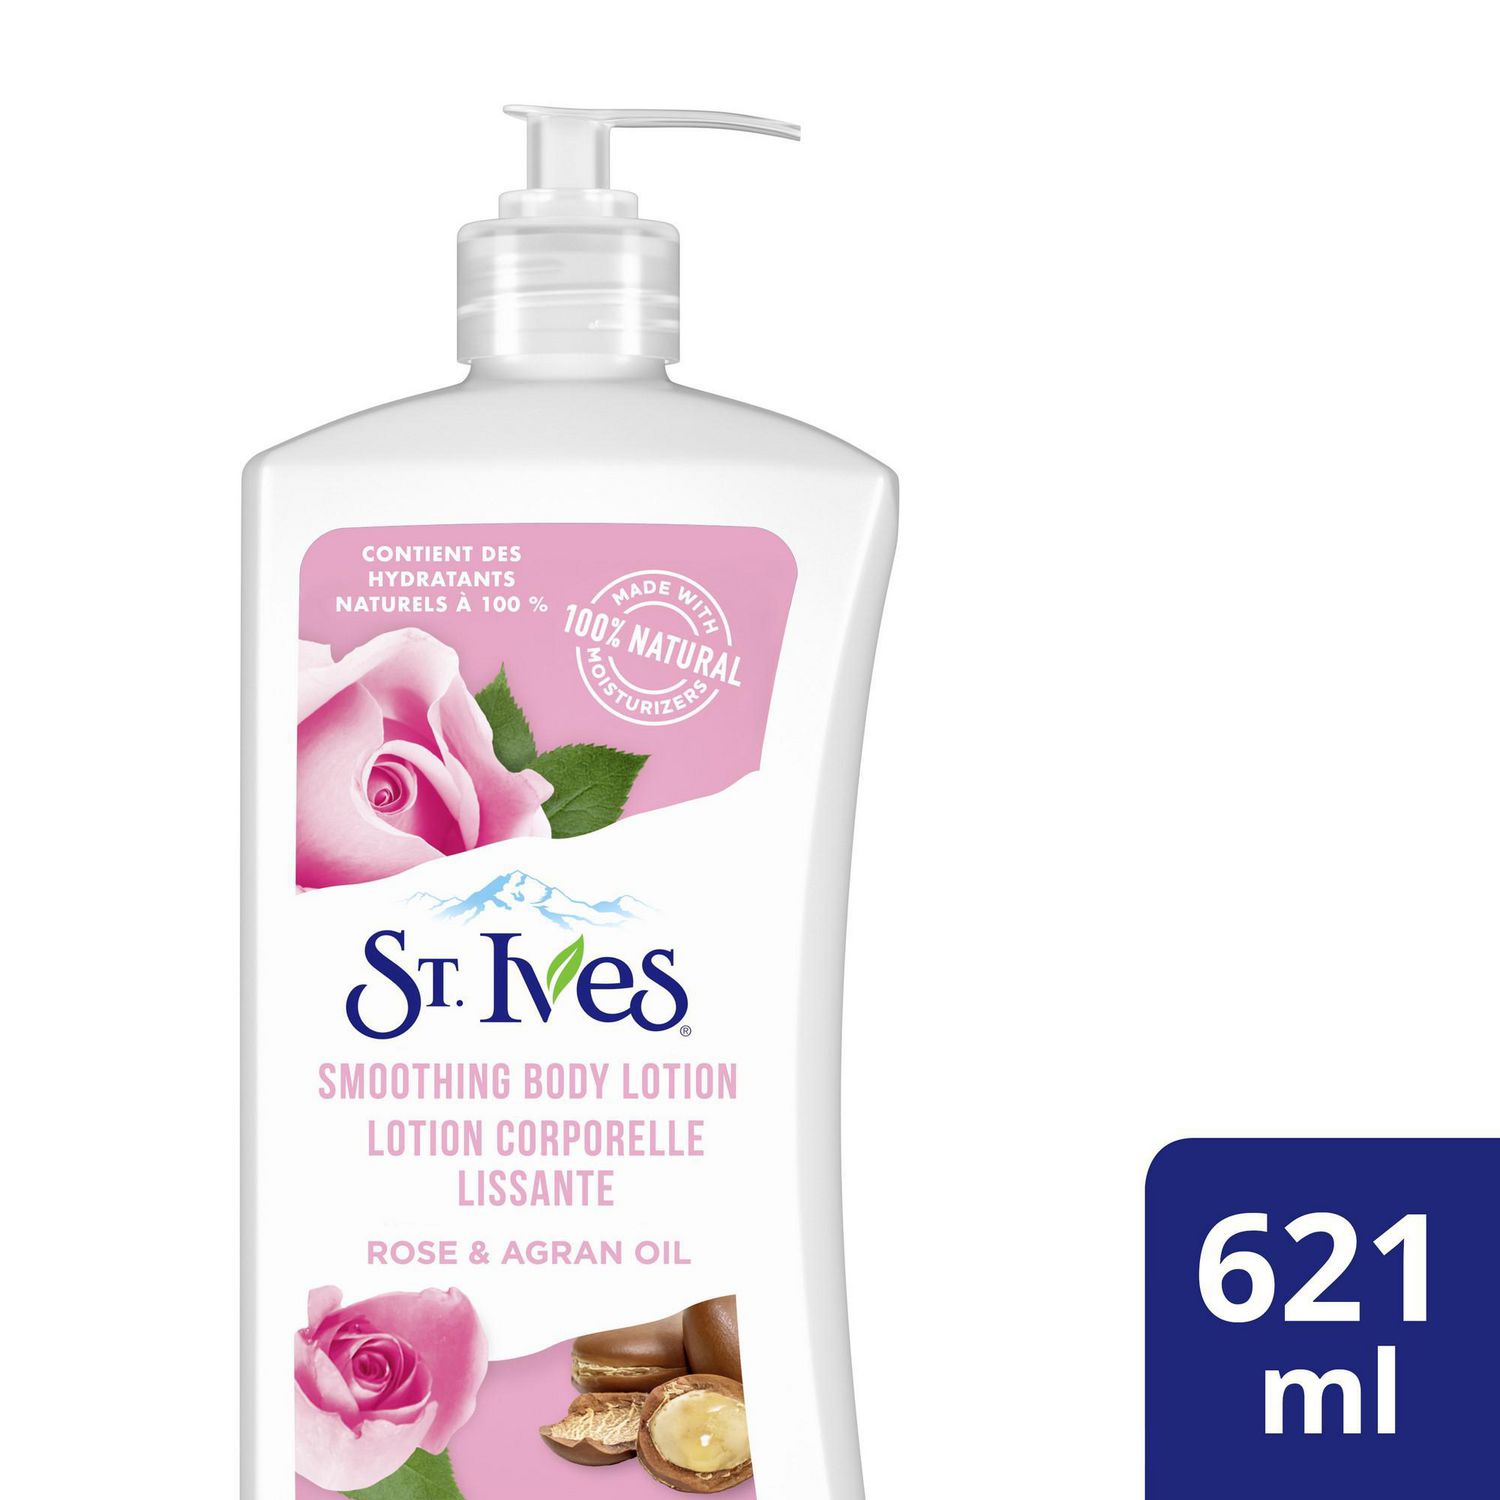 indkomst gys Kritik St. Ives Rose and Argan Oil Smoothing Body Lotion | Walmart Canada